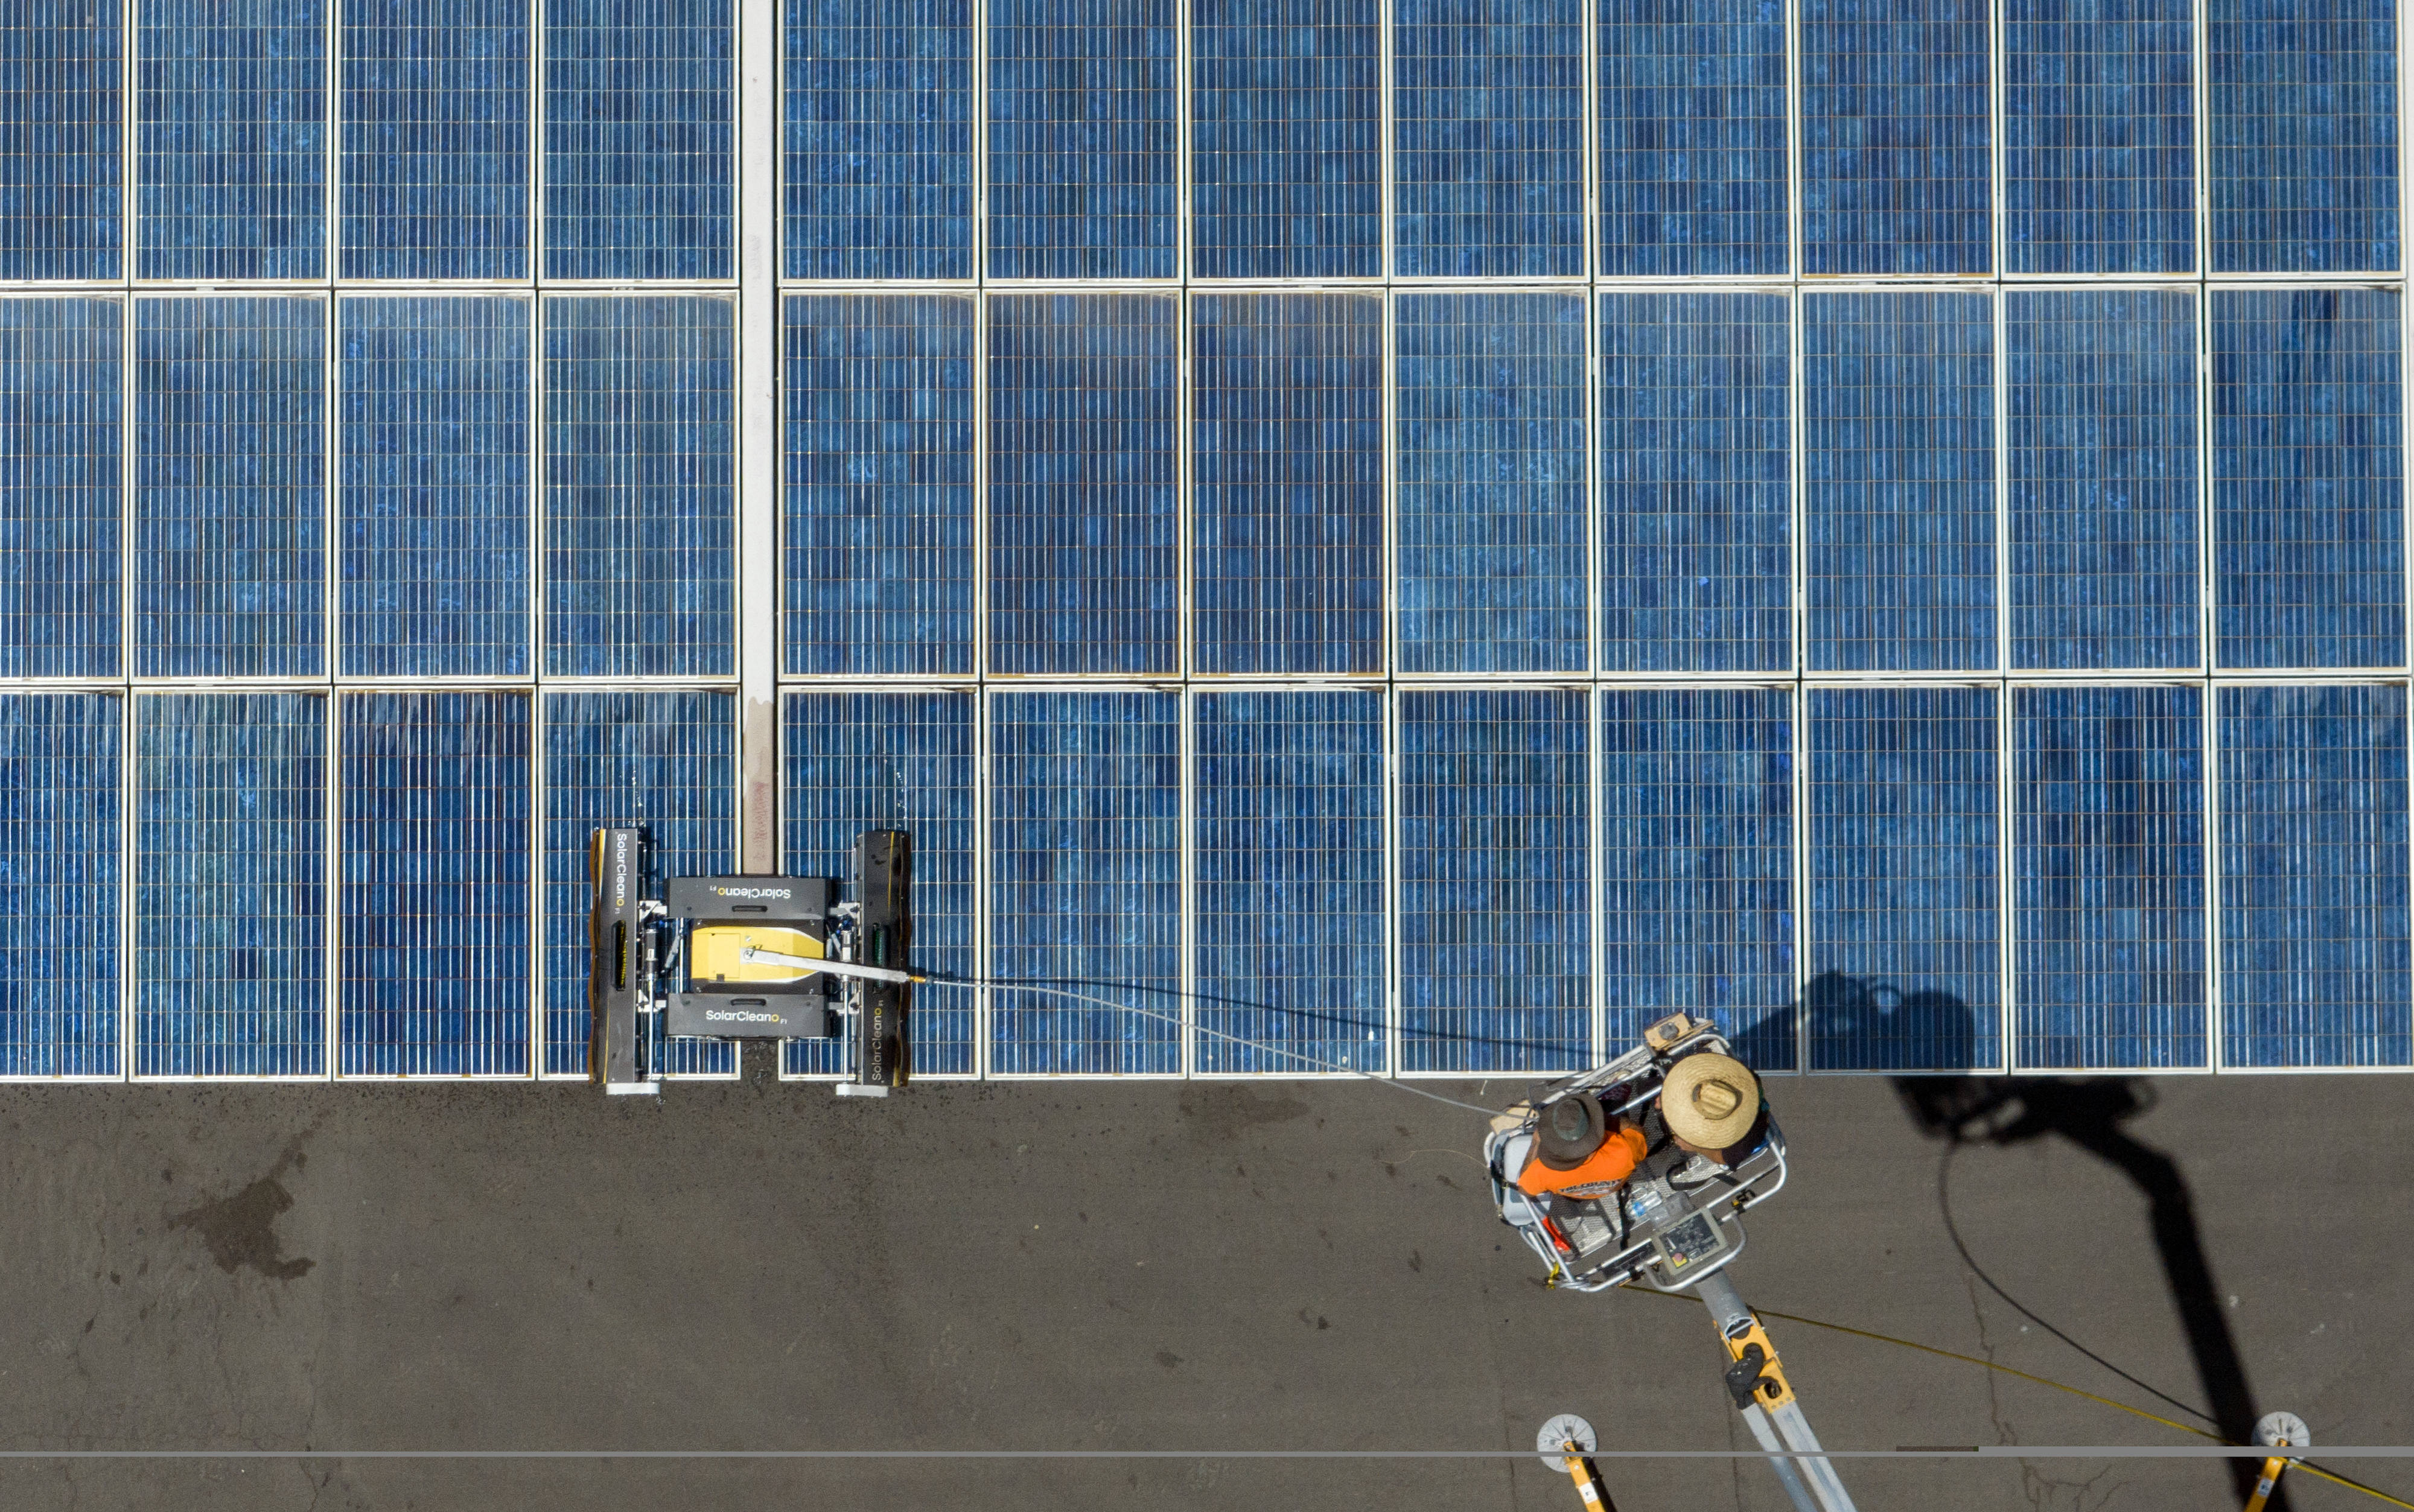 A person wearing a straw hat and riding in the bucket of an aerial lift is seen from above as they control a robot washing solar panels.